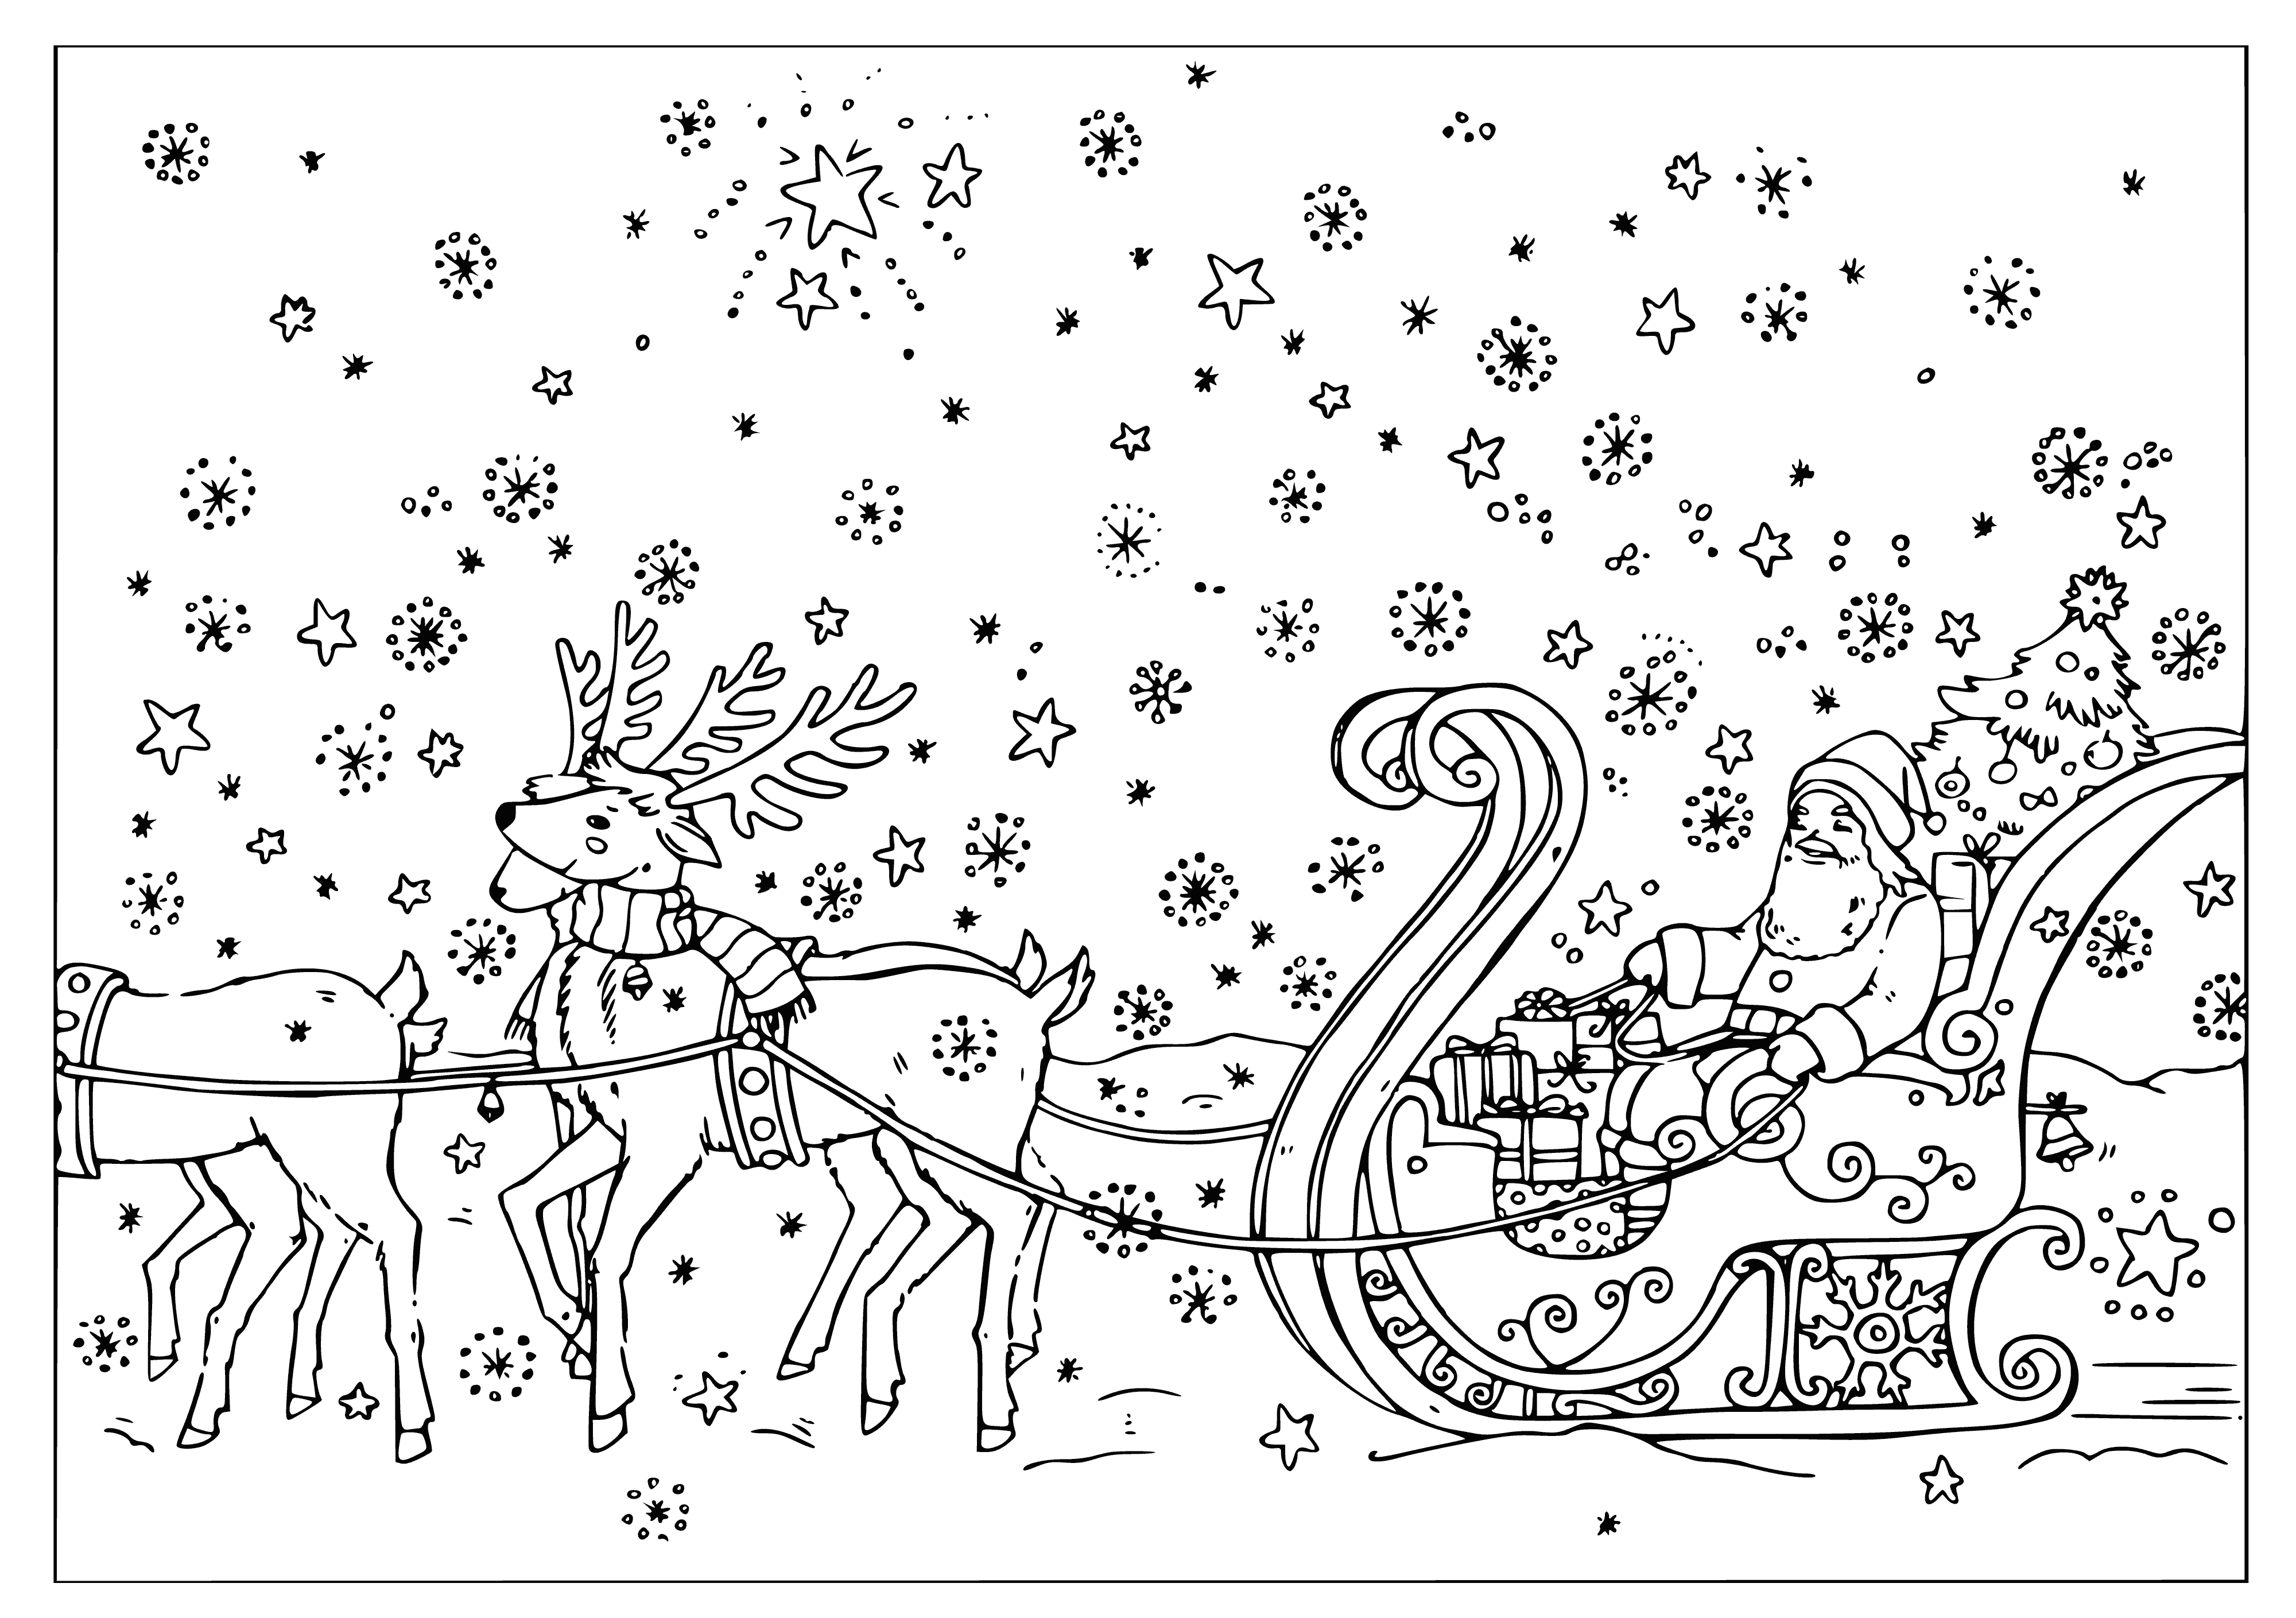 coloring page: Santa is delivering presents in his sleigh pulled by reindeer, wearing a red coat & hat and carrying a bag of gifts, with a snow-filled sky.